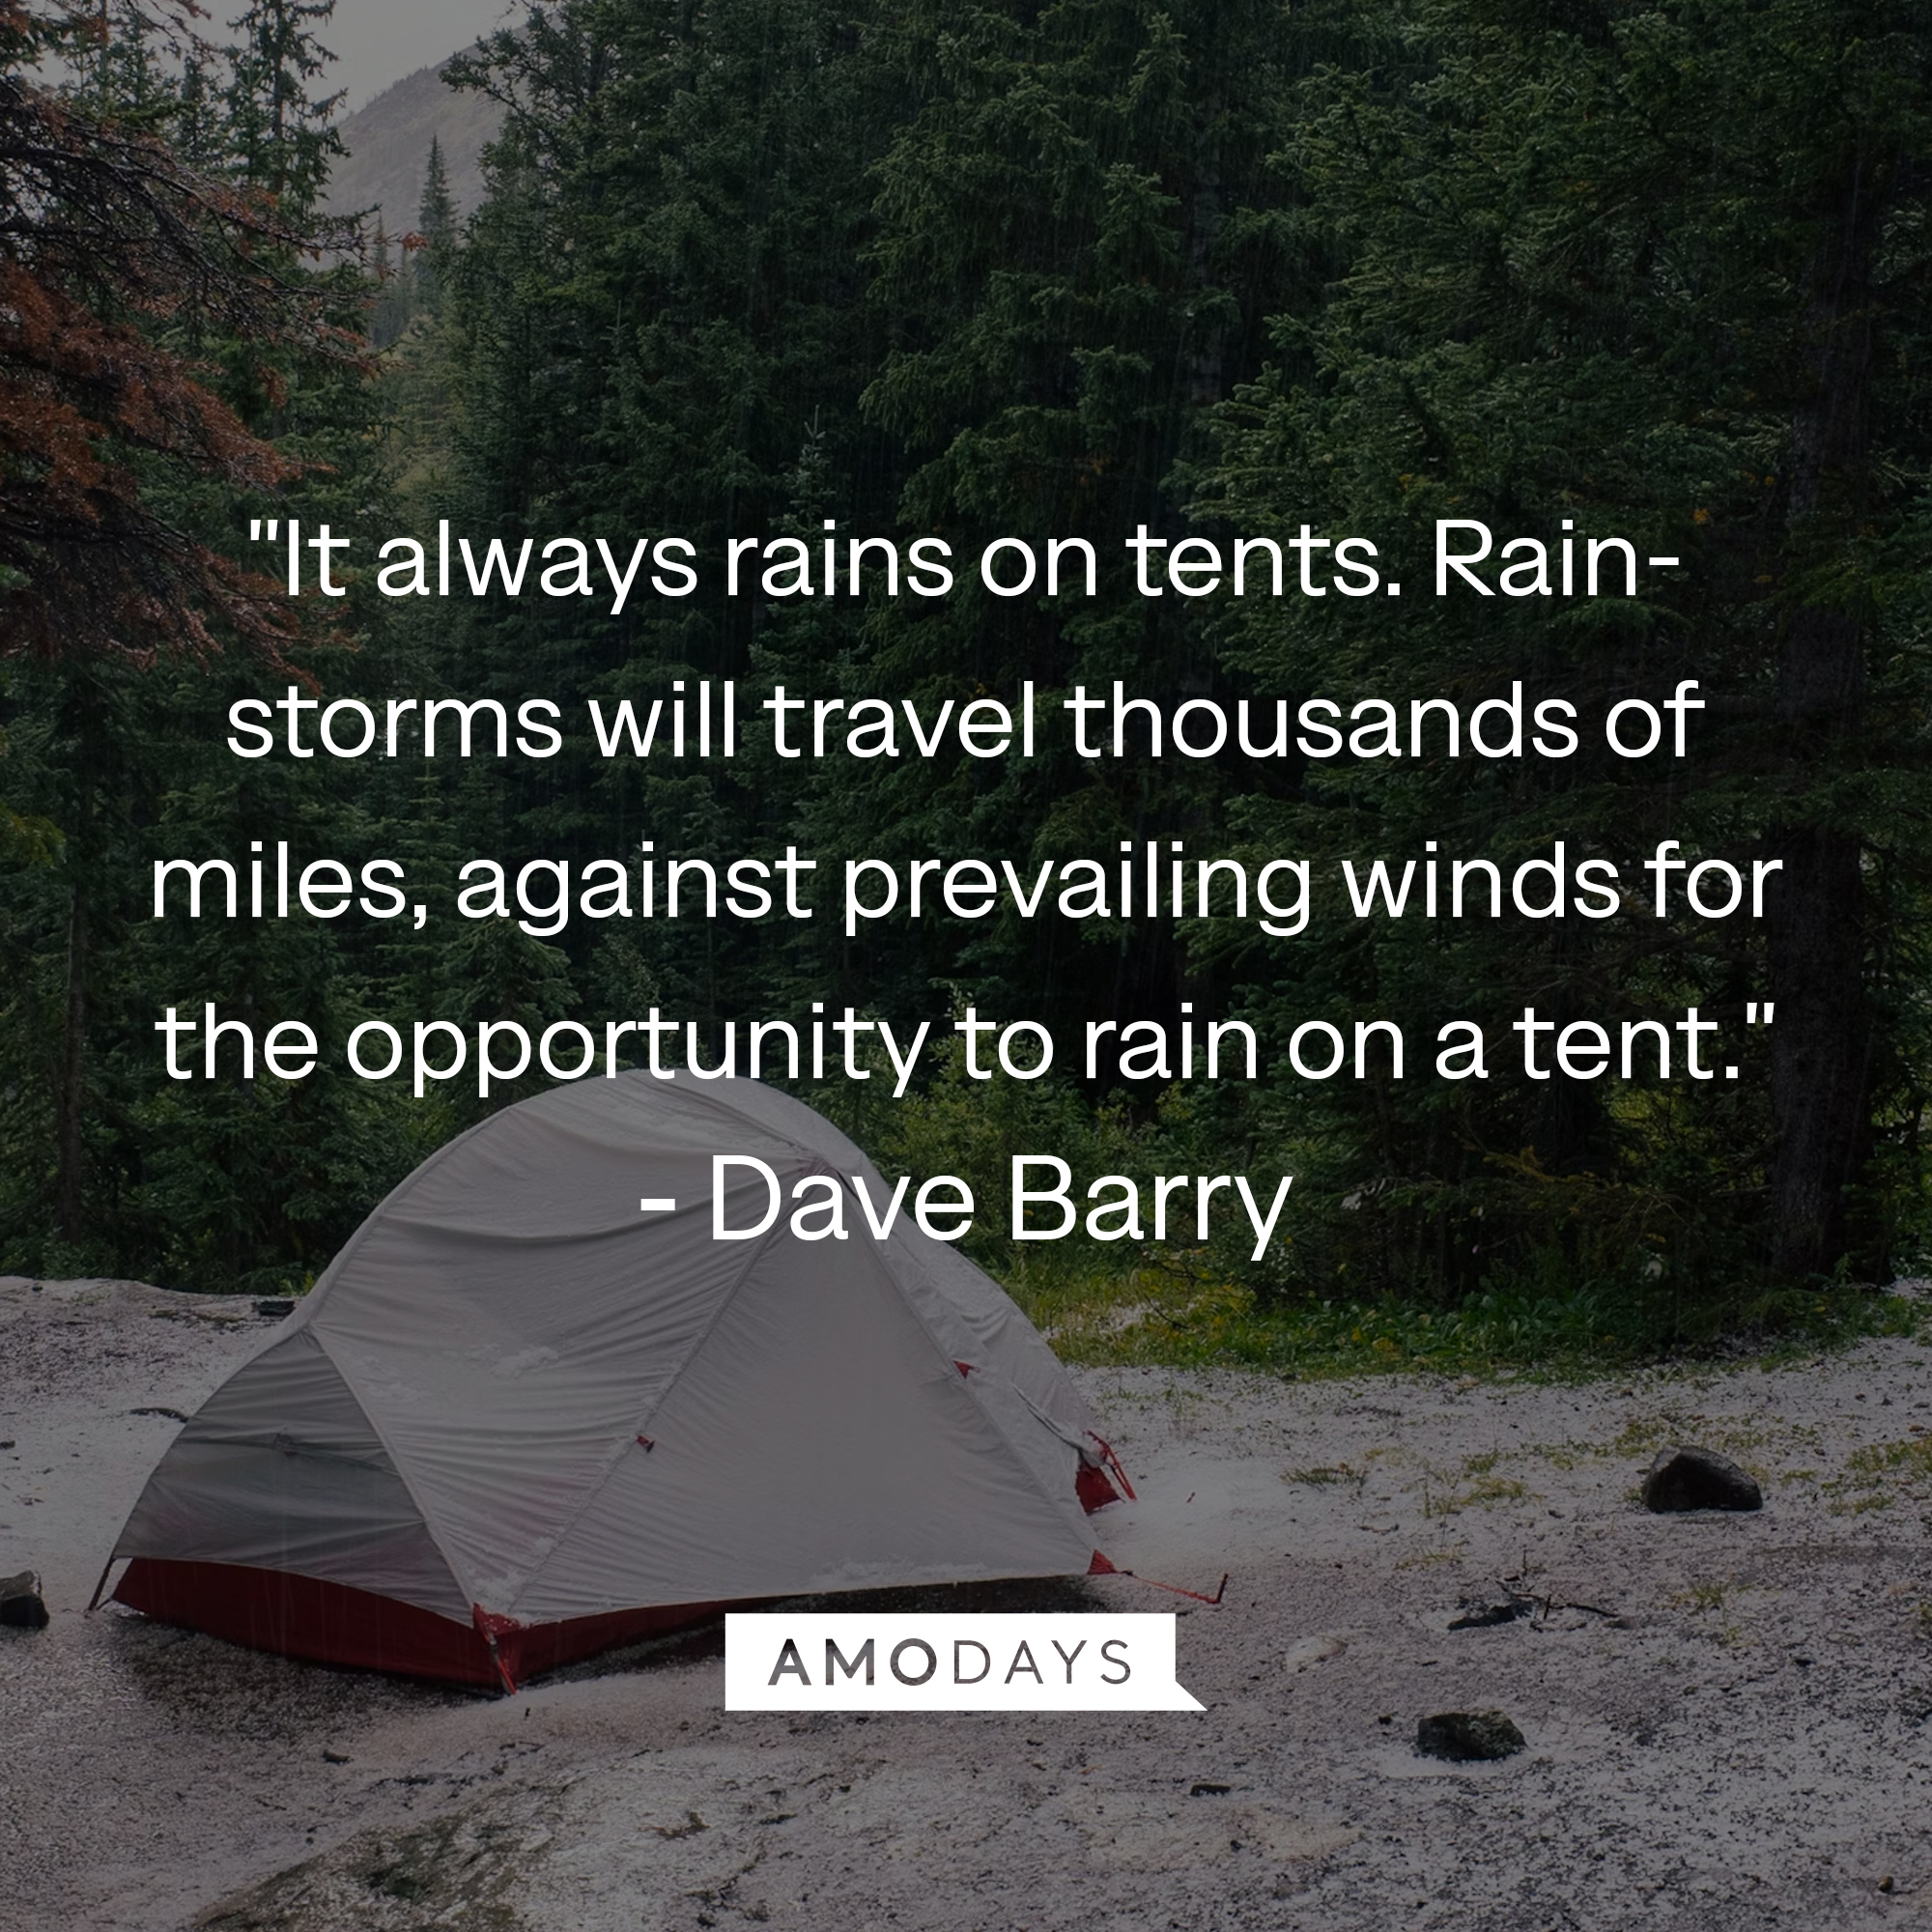 Dave Barry's quote: "It always rains on tents. Rainstorms will travel thousands of miles, against prevailing winds for the opportunity to rain on a tent." Source: Countryliving